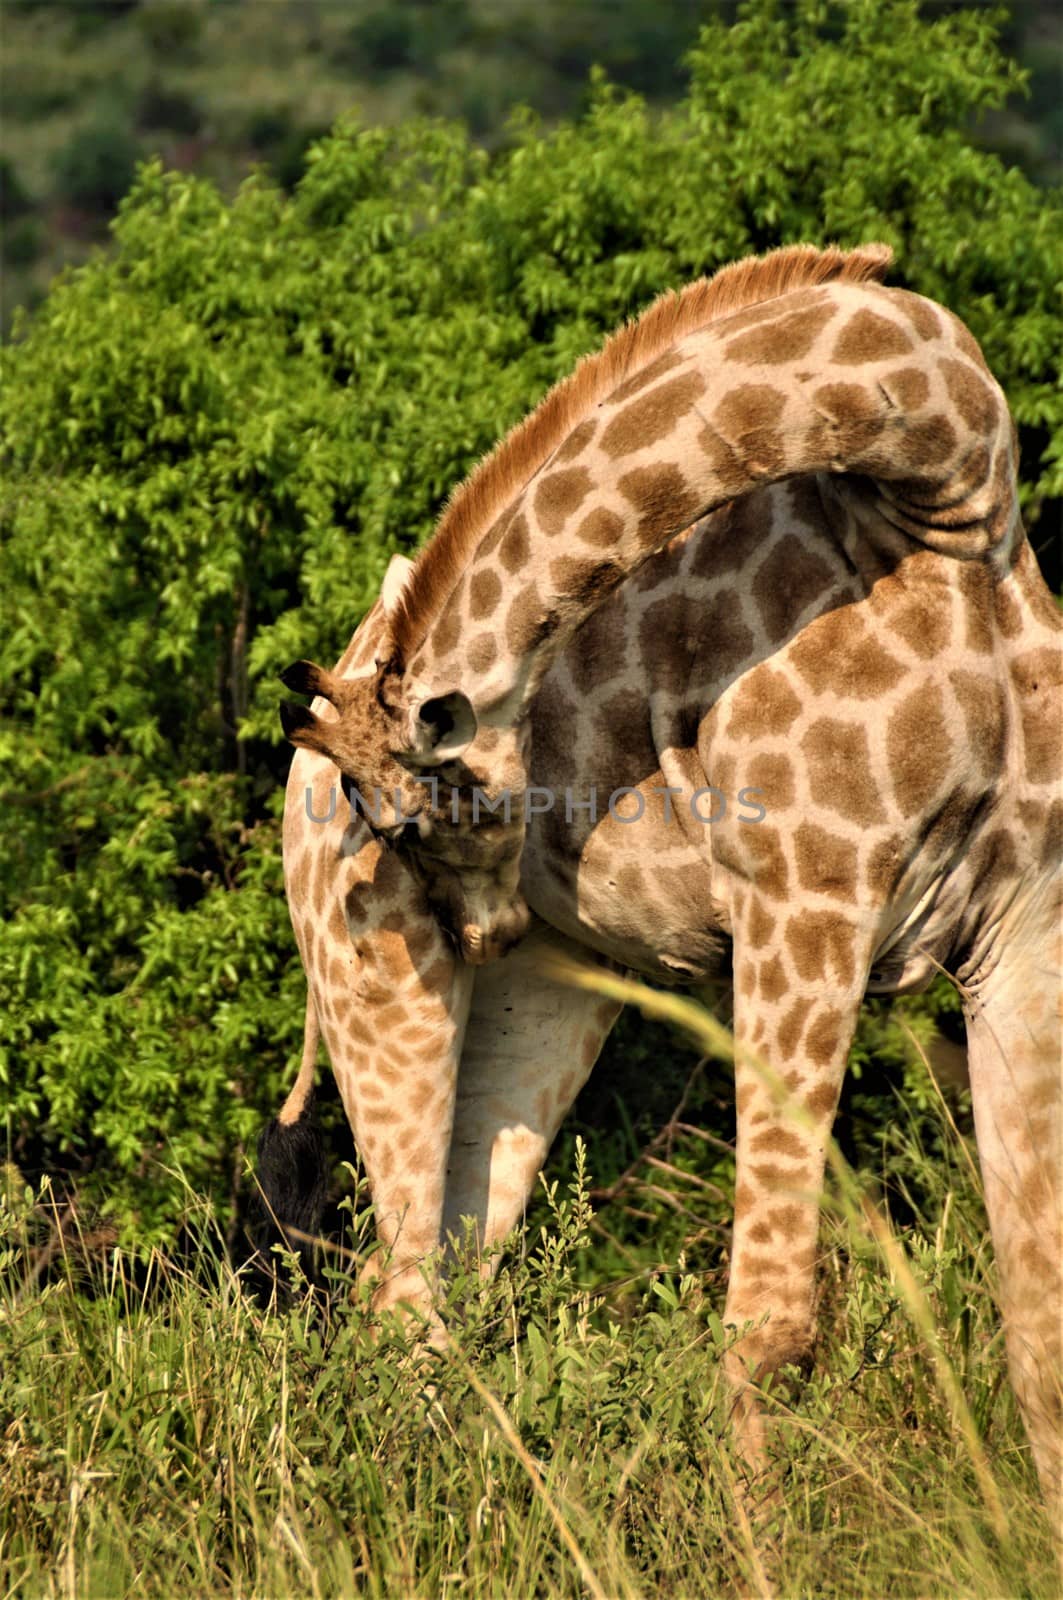 Giraffe sniffs her right hind leg in front of some trees by Luise123